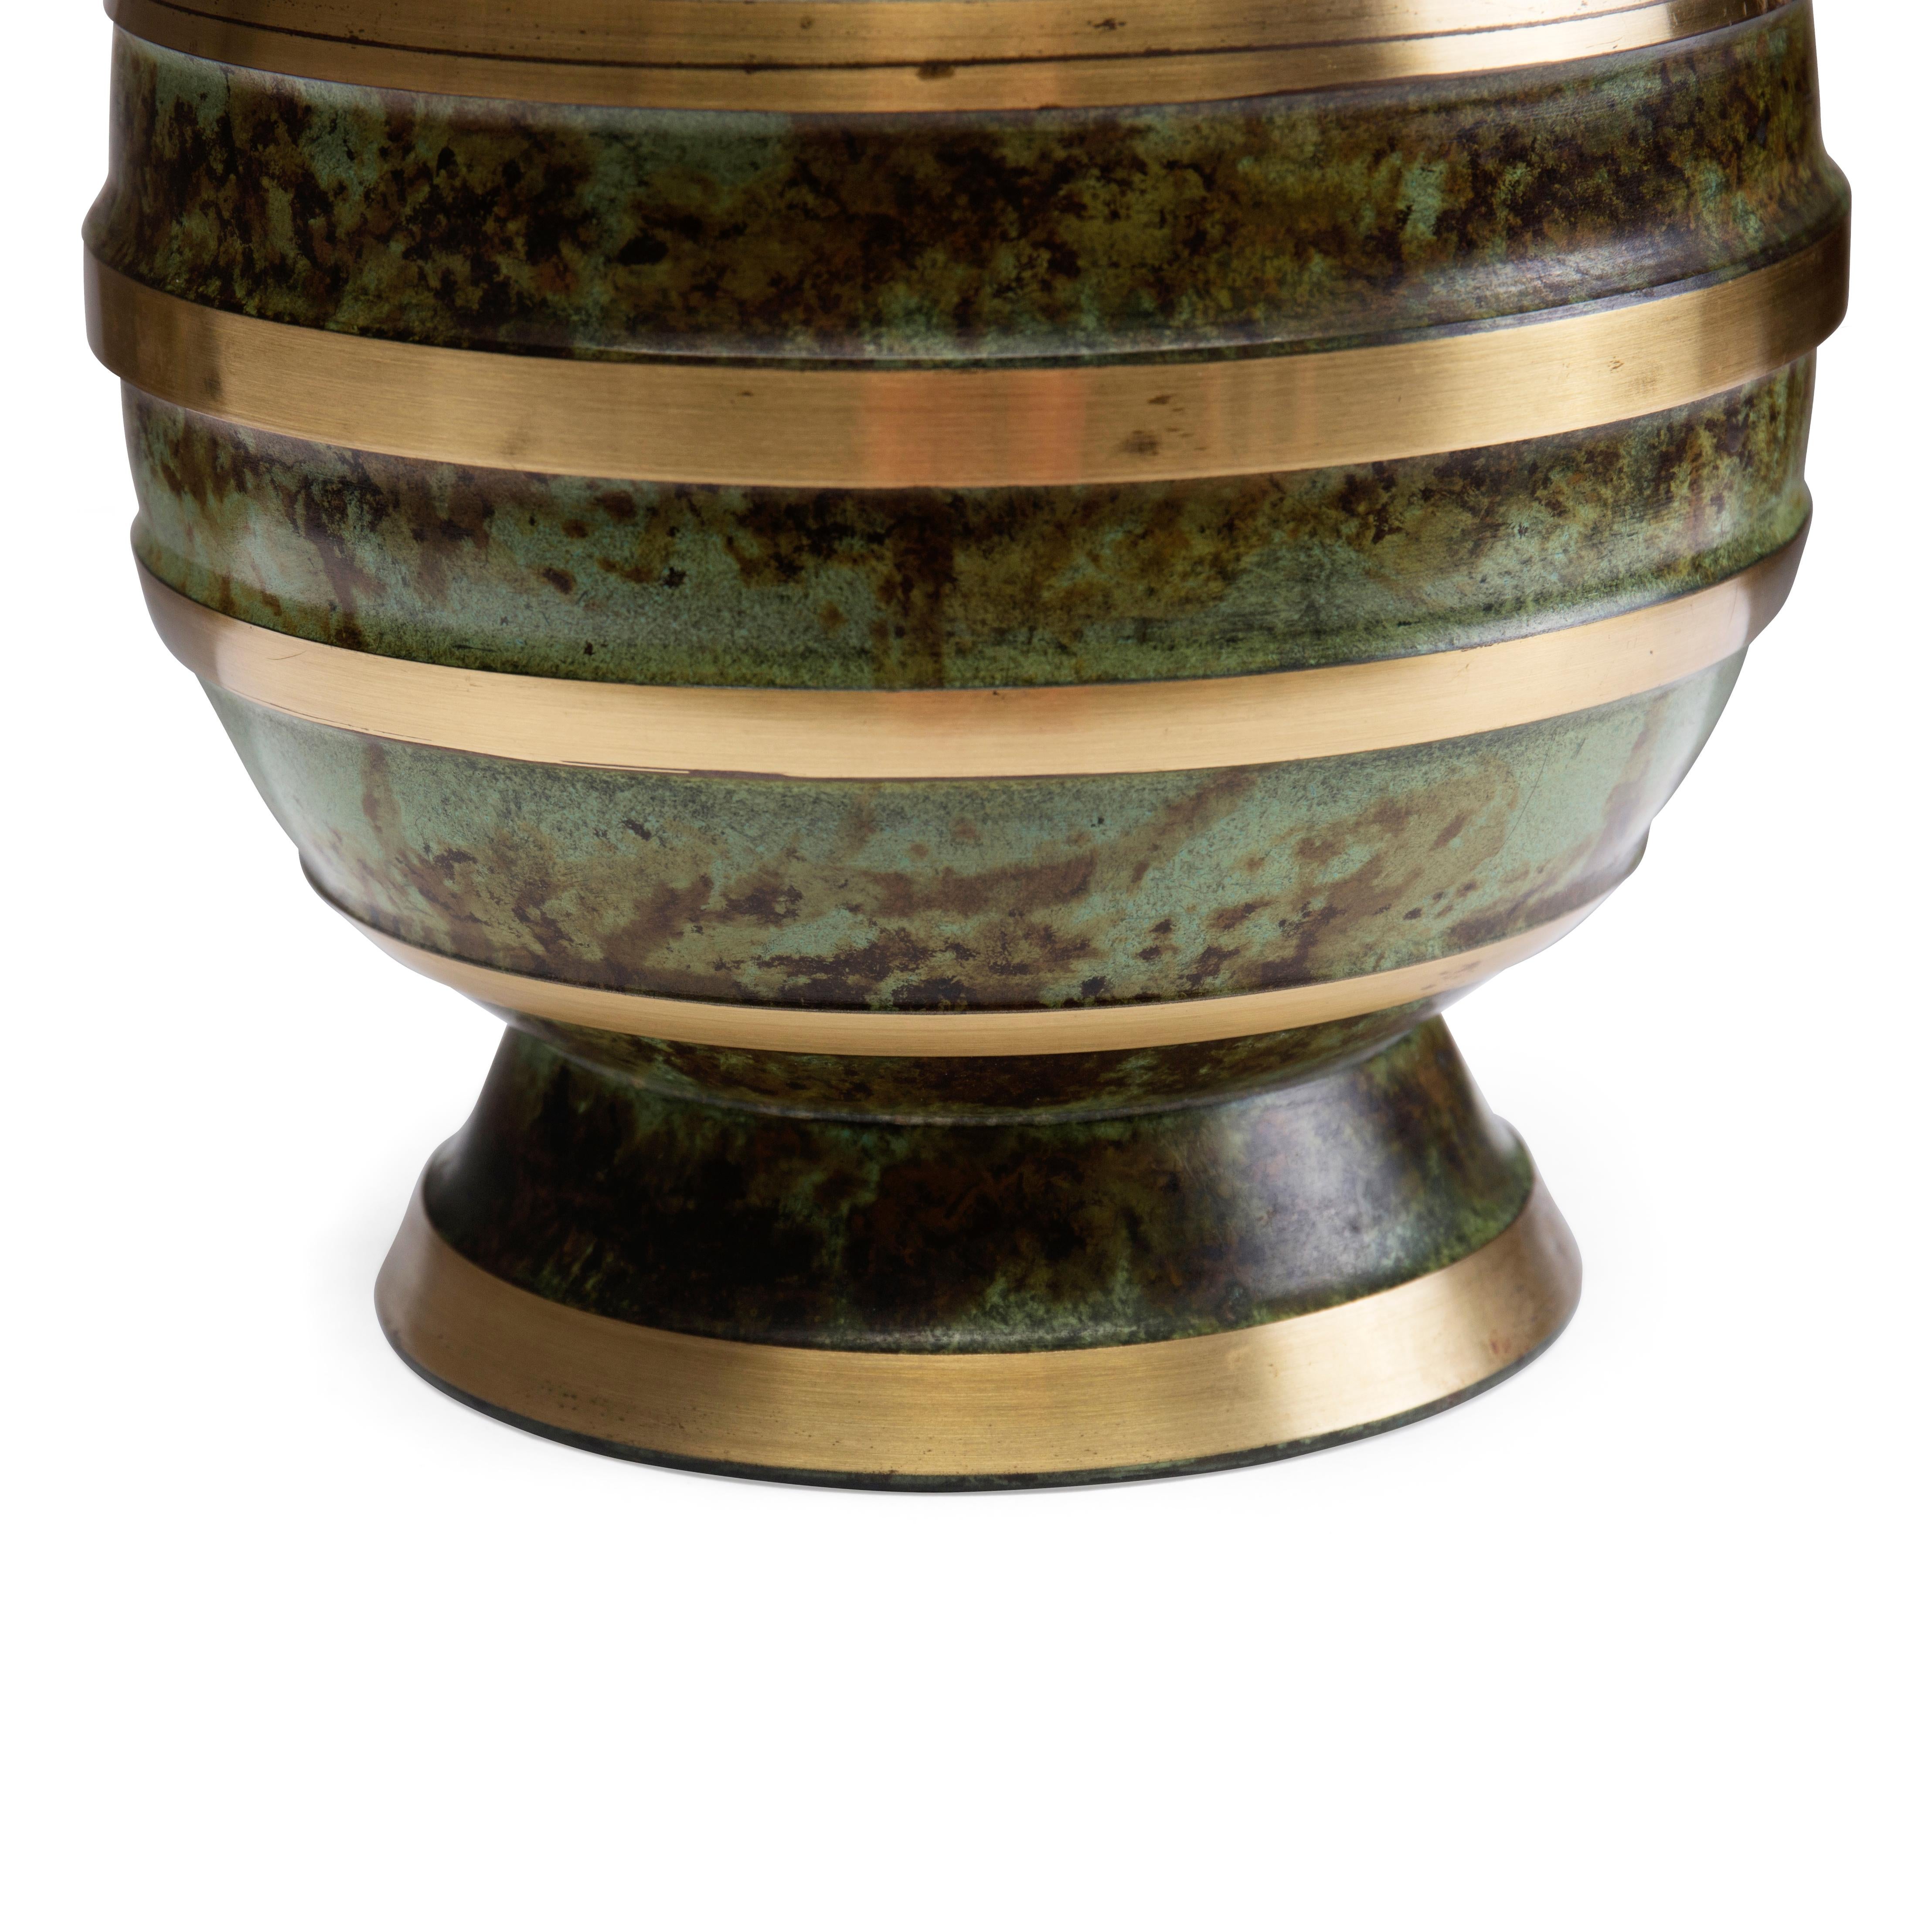 Glazed Swedish art deco table lamp with patinated and polished bronze